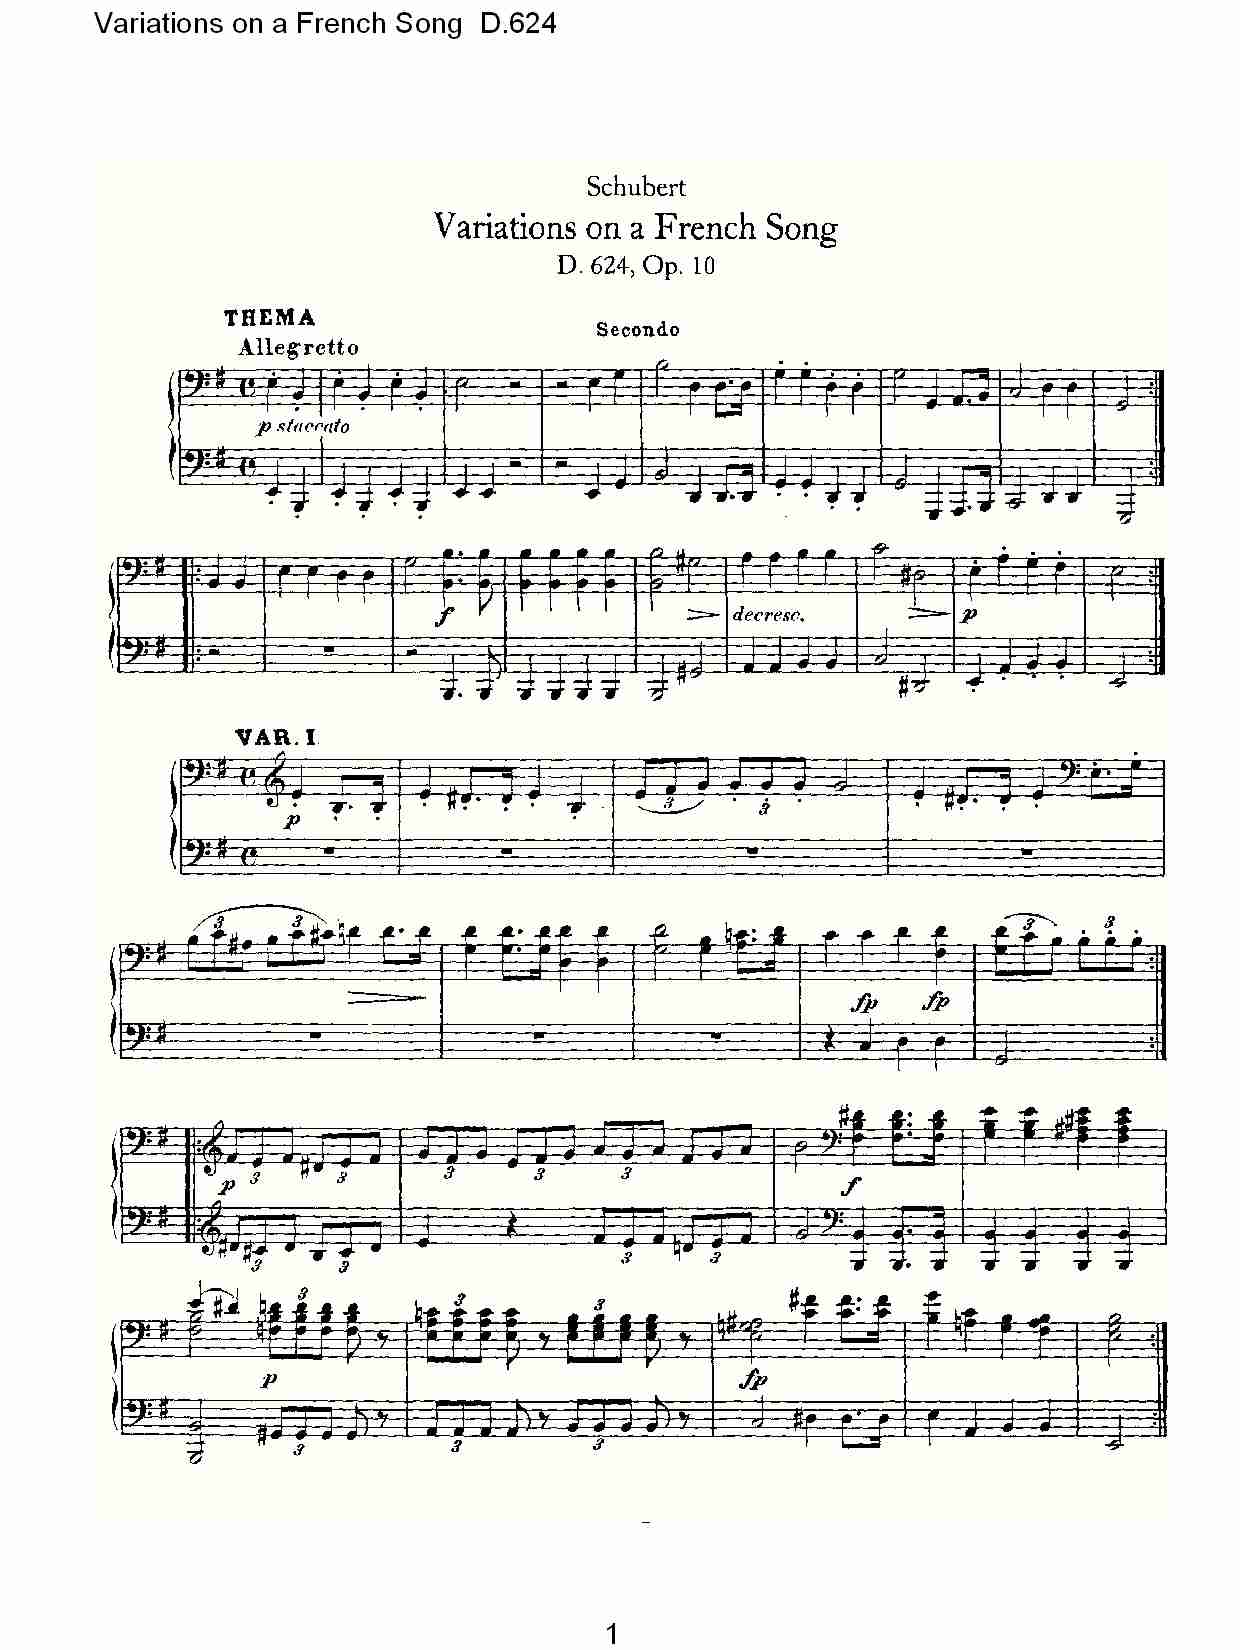 Variations on a French Song D.624  法国歌曲变鸣曲D.624（一）总谱（图1）